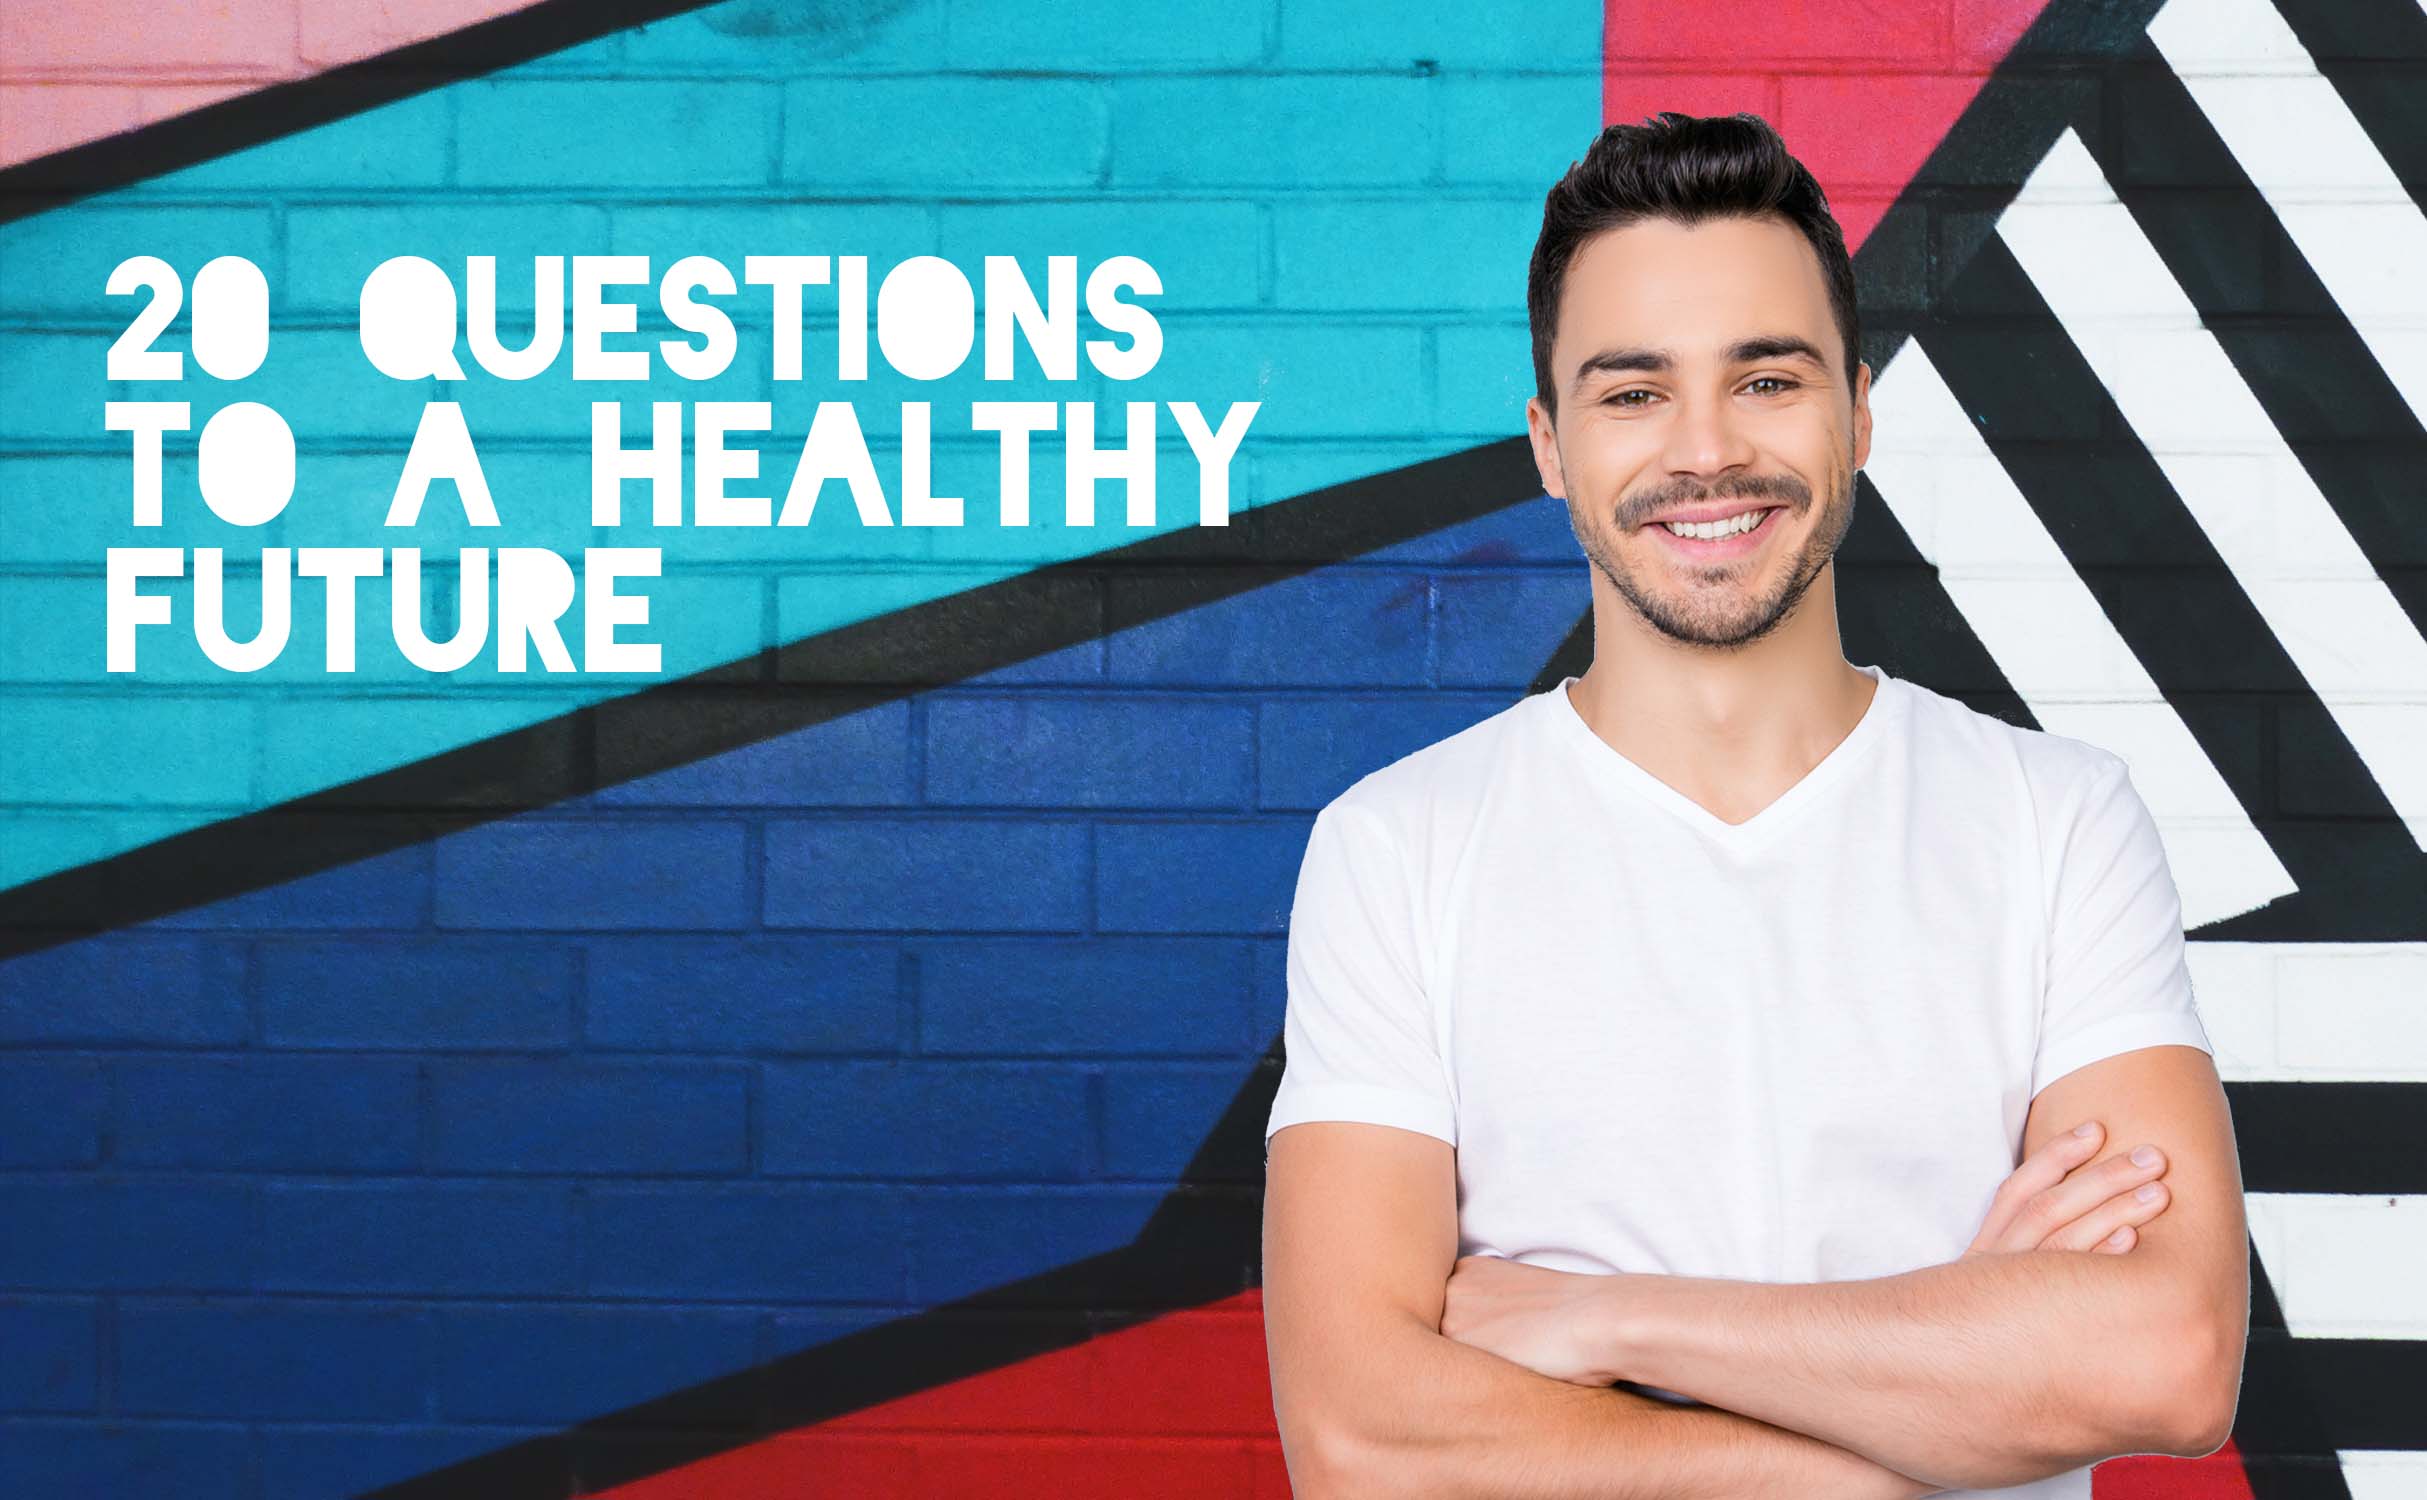 Image with adolescent smiling with text, "20 questions to a healthy future" displayed